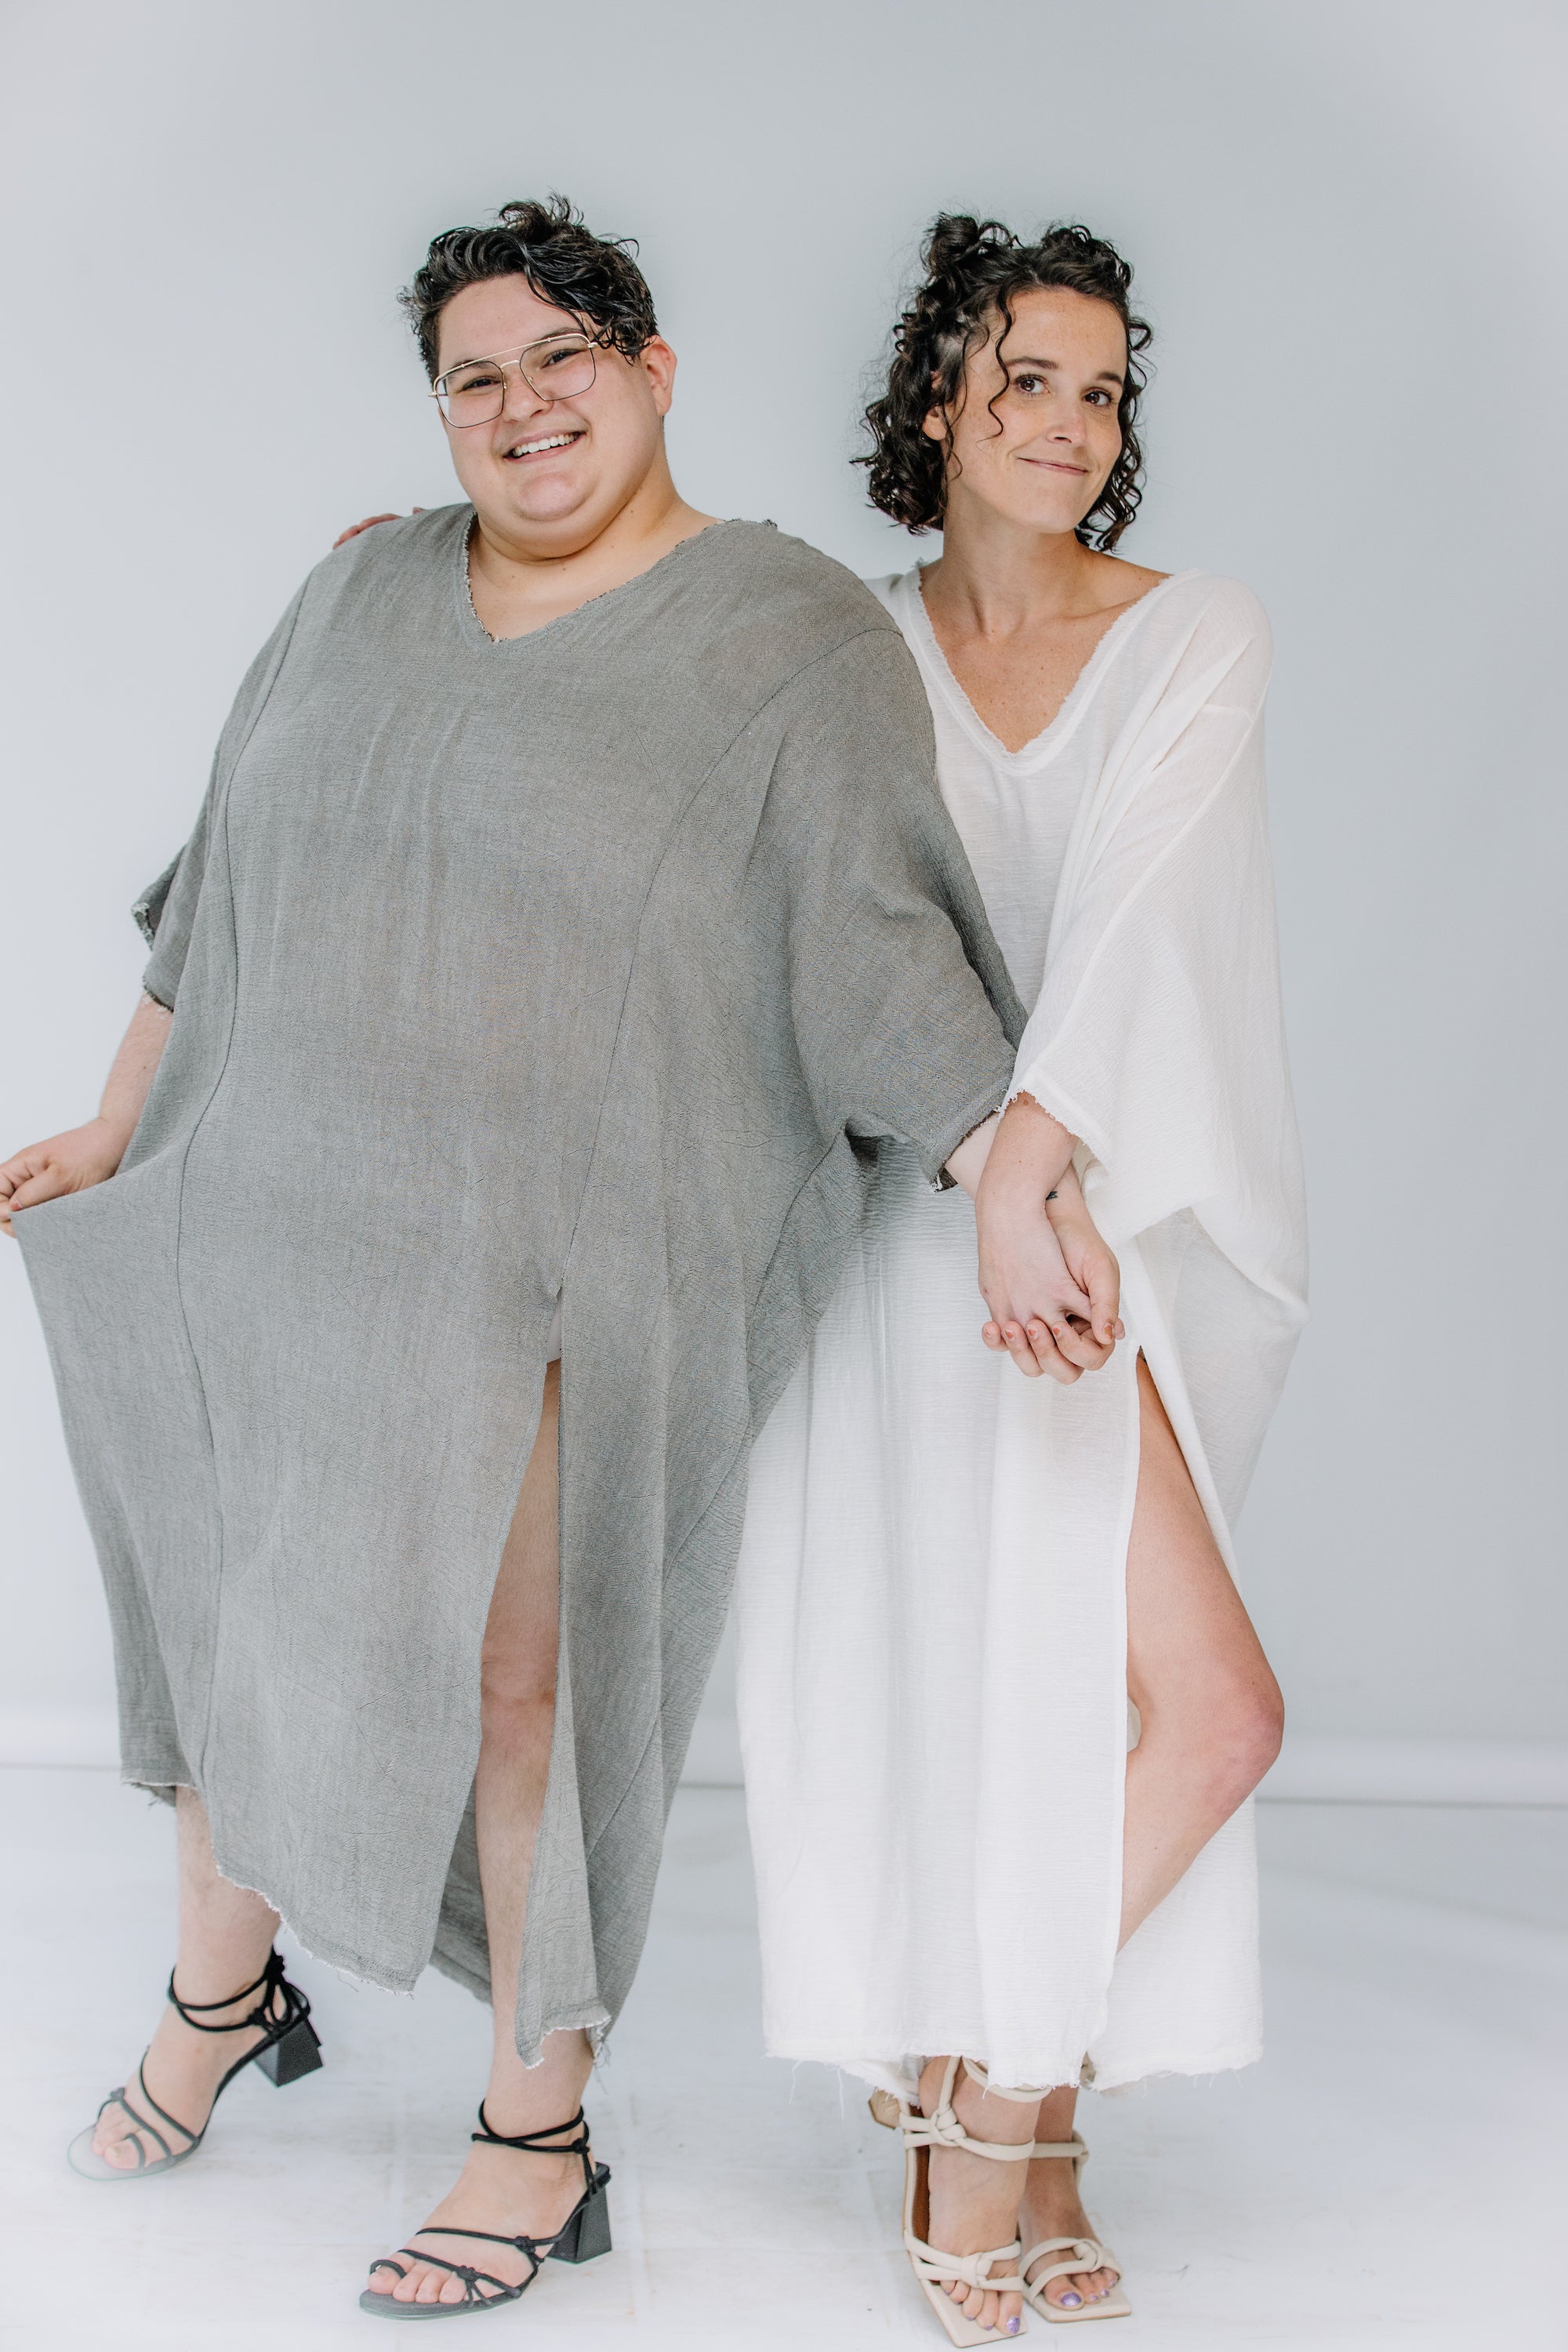 jules and lacey both wear the sile maxi caftan. jules has short dark hair, and they are wearing khaki with black sandals. lacey has dark curly spacebuns and wears the caftan in white with the creative ivory heels.